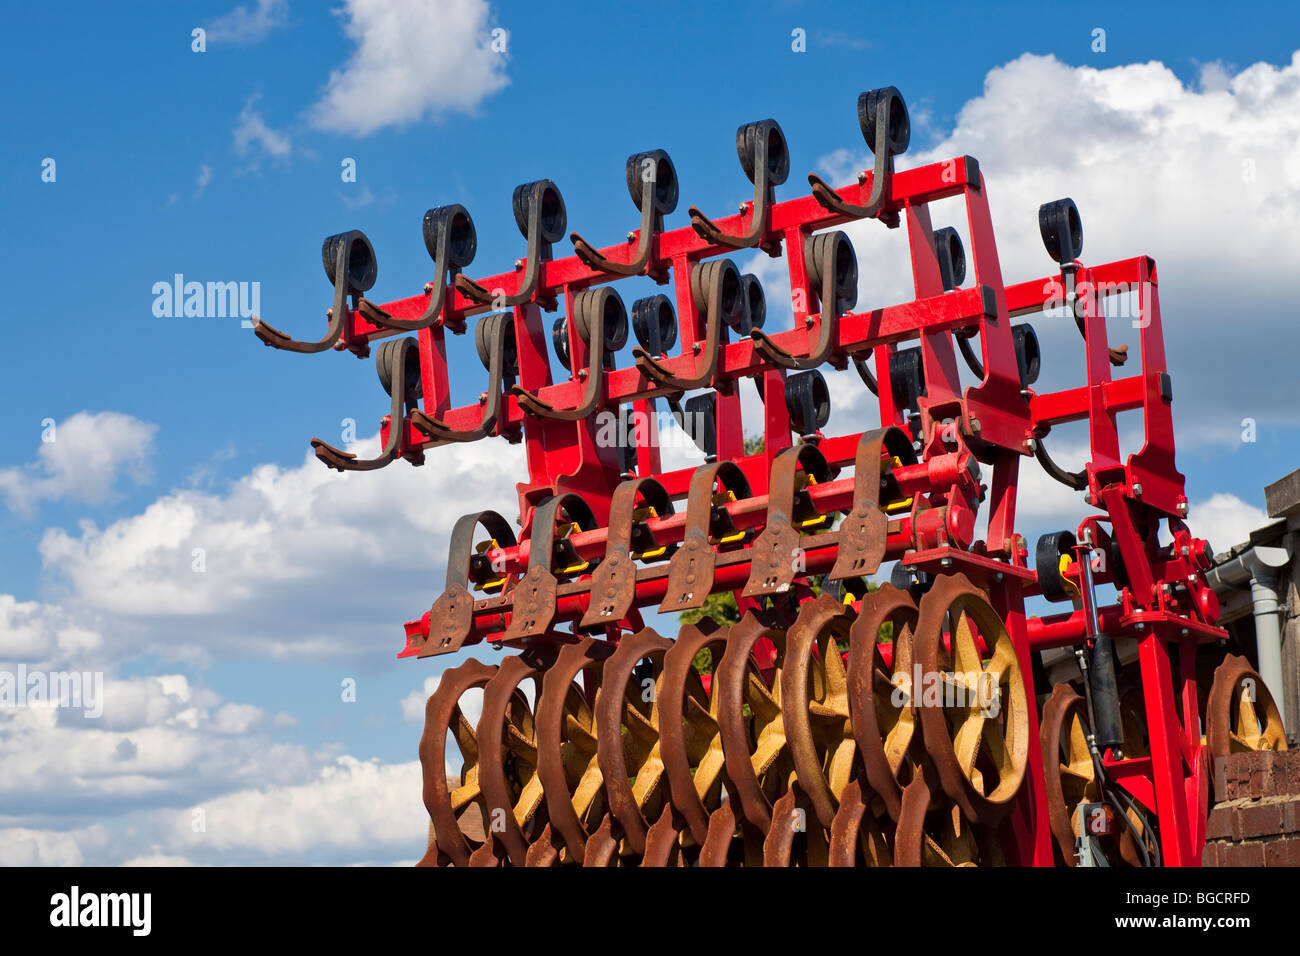 Bright red farming implement, against bright blue sky and white clouds Stock Photo